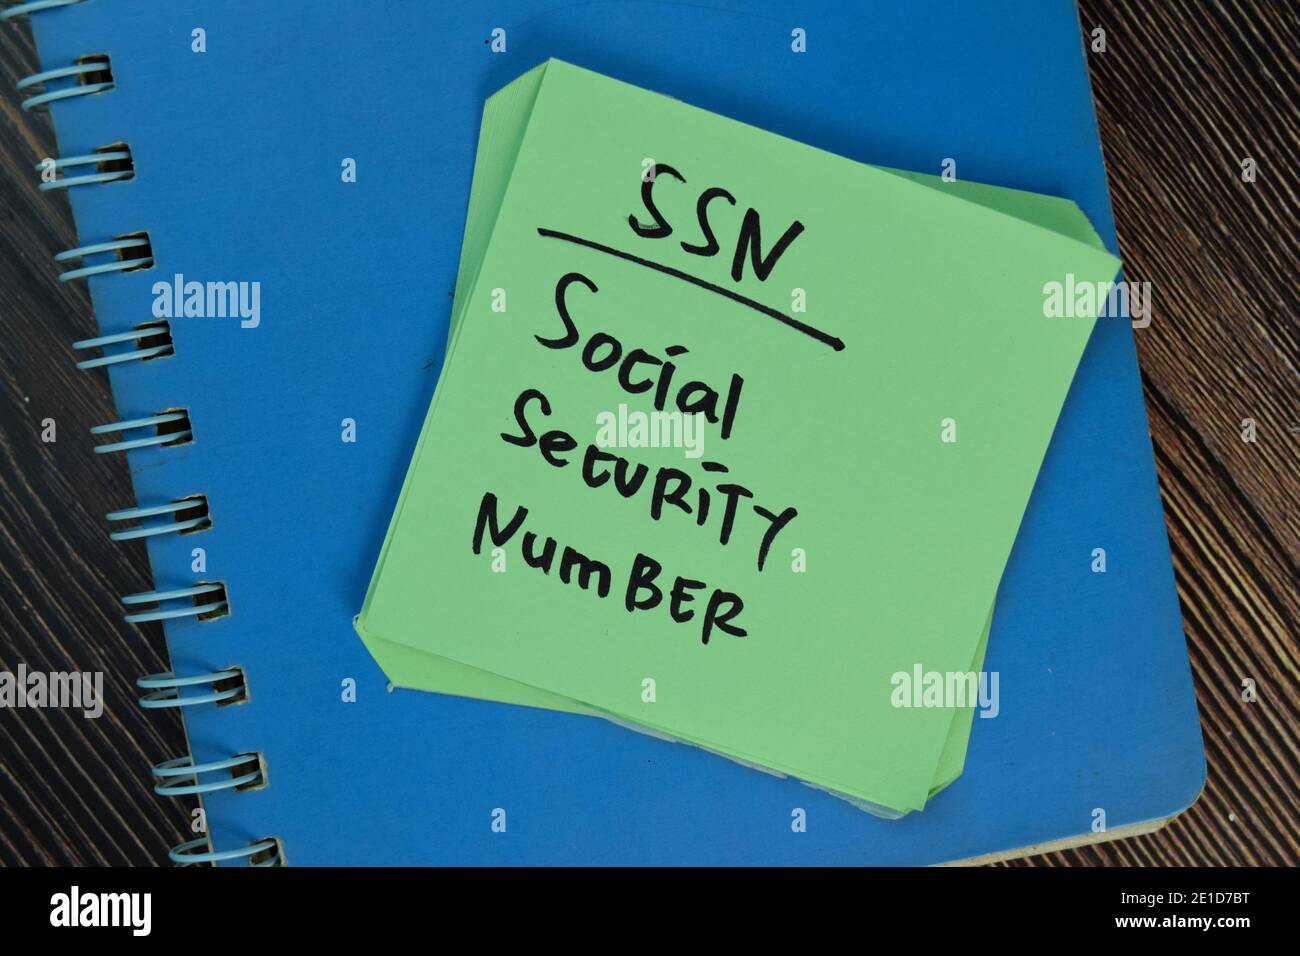 SSN - Social Security Number write on sticky notes isolated on